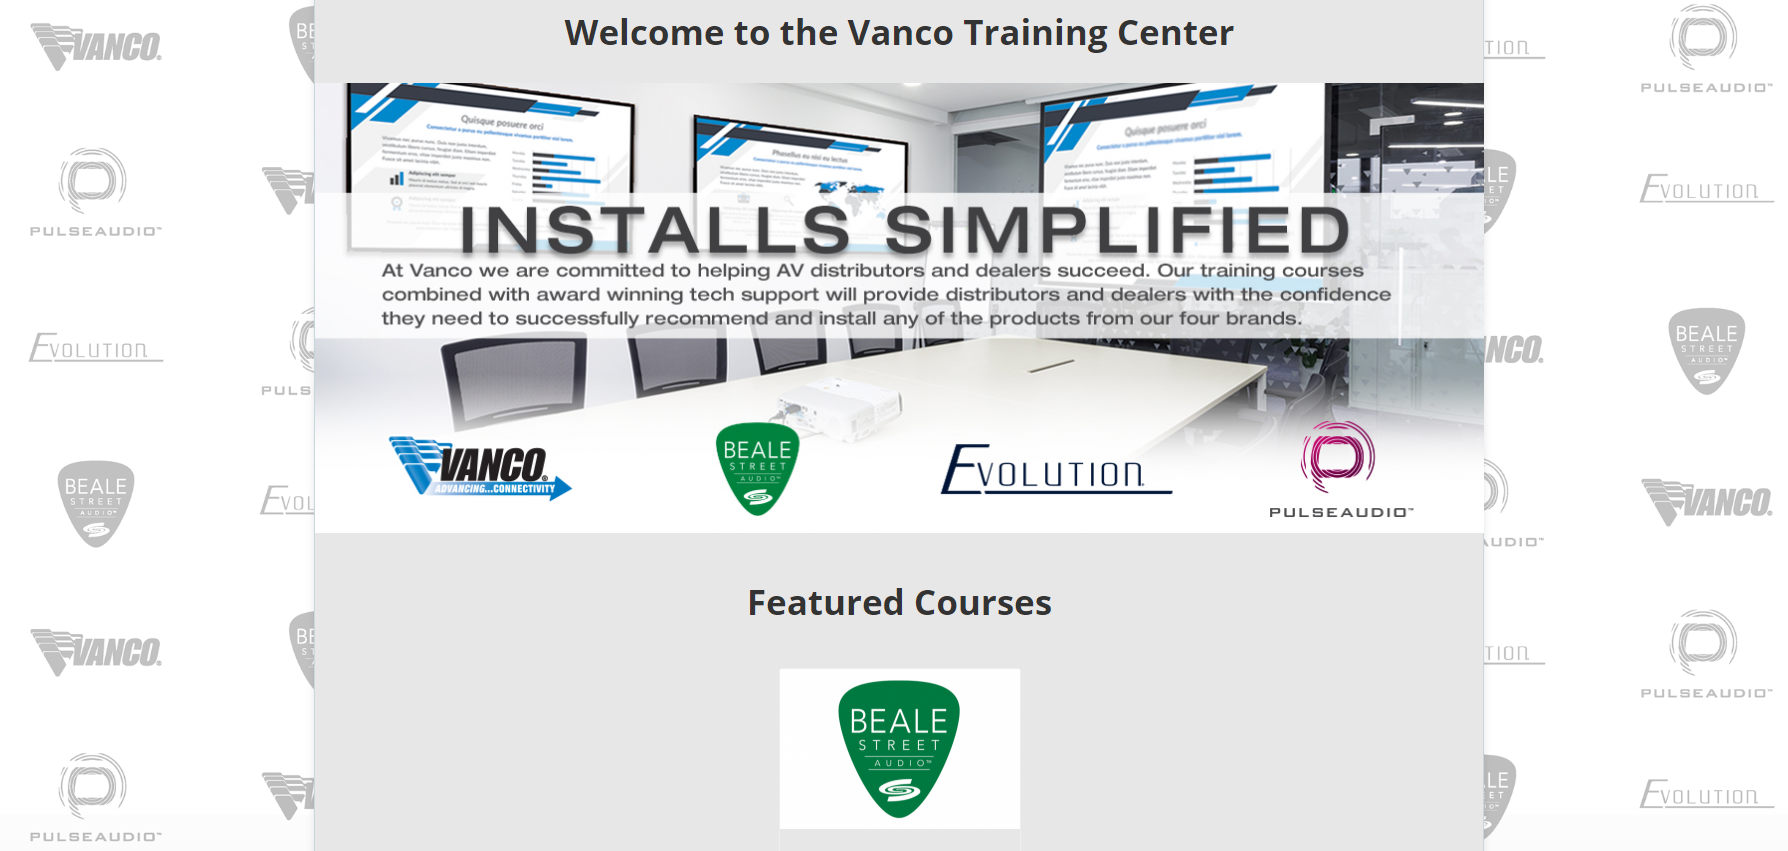 New HDMI Training Modules From Vanco